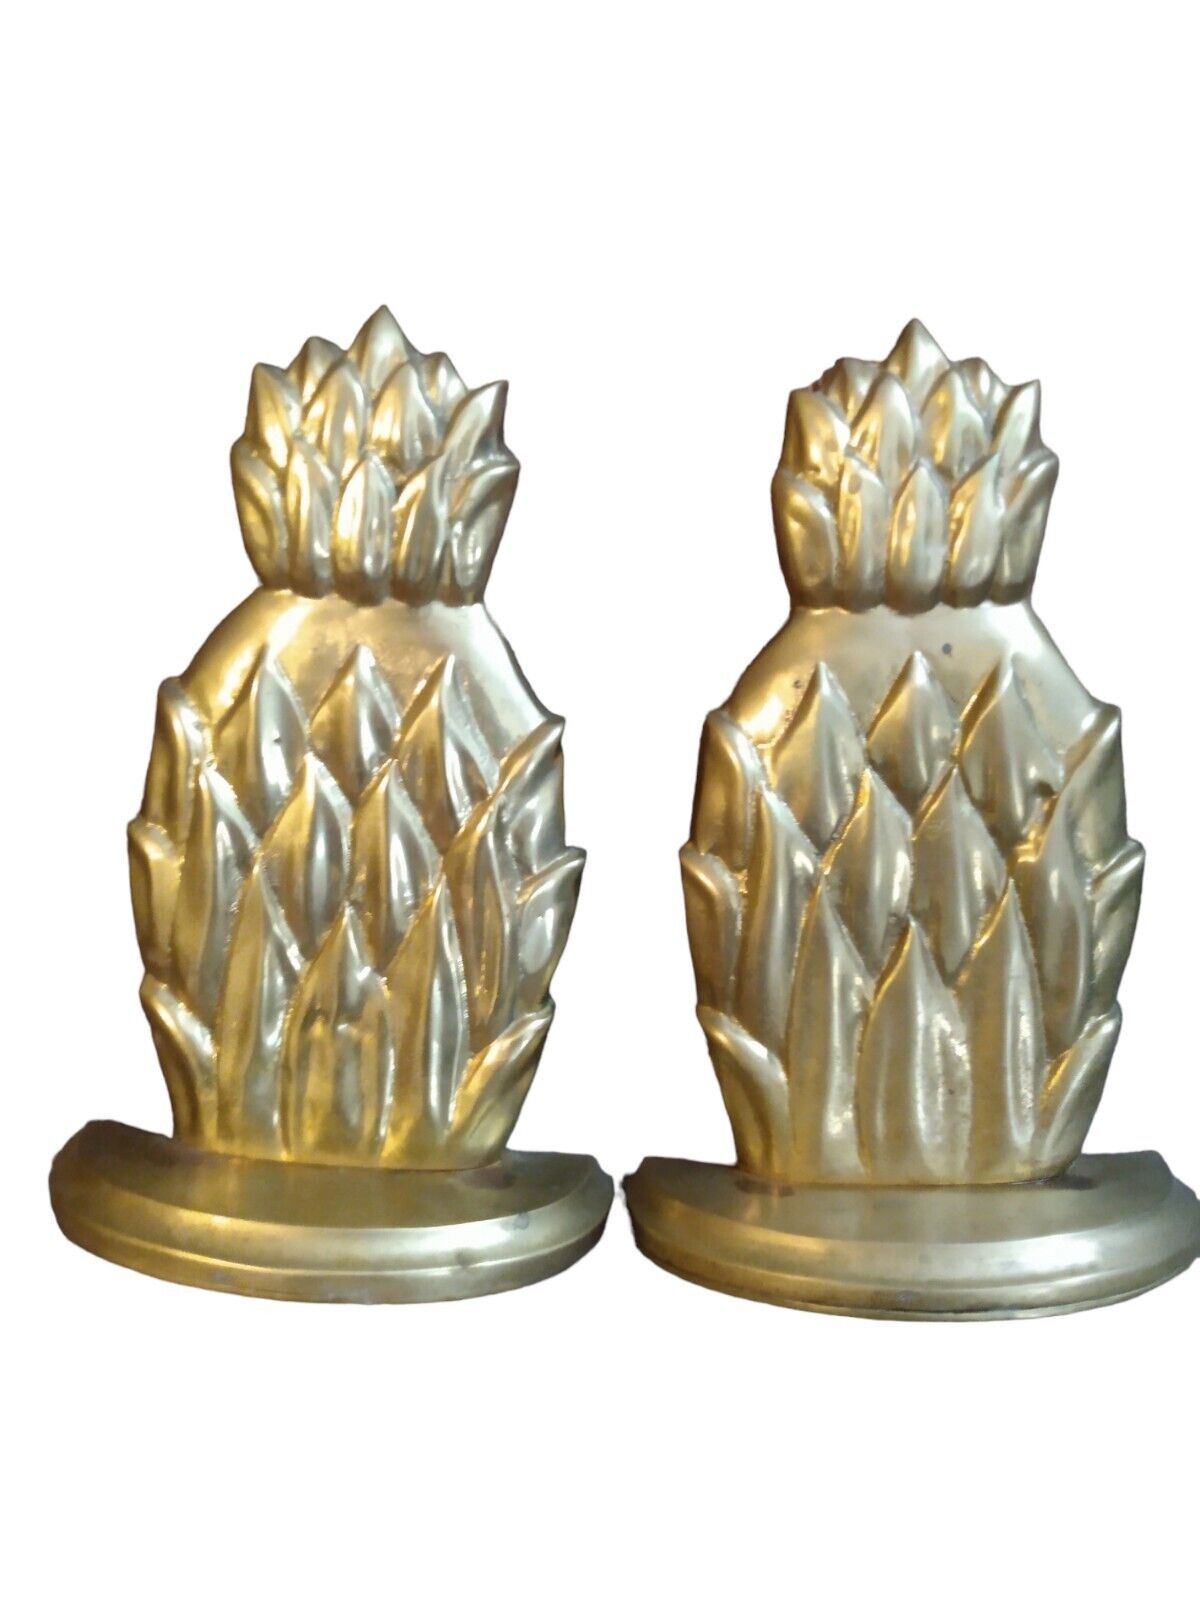 Vintage Pair of Brass Pineapple Bookends MCM Patina Heavy 8” X 5” Each  READ